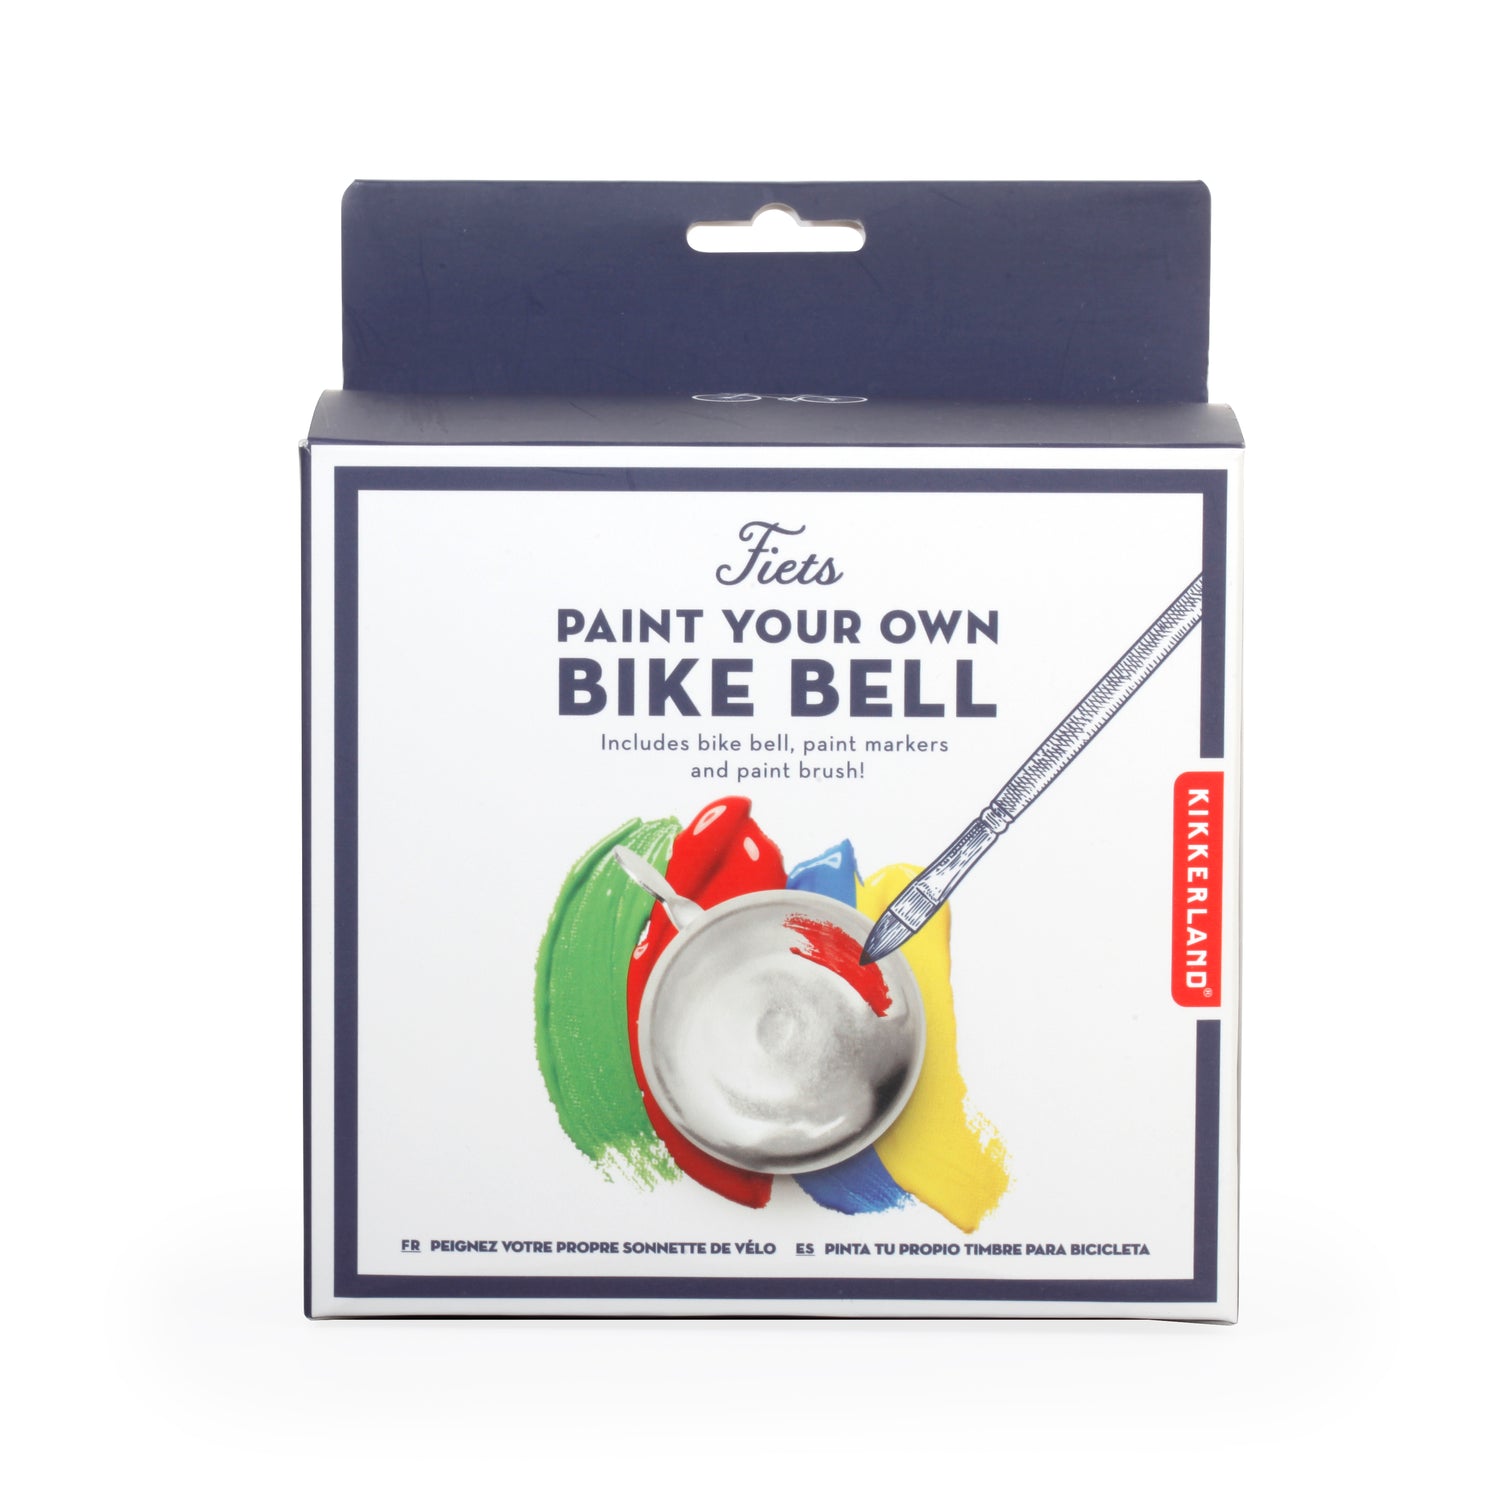 Fiets DIY Paint Your Own Bike Bell